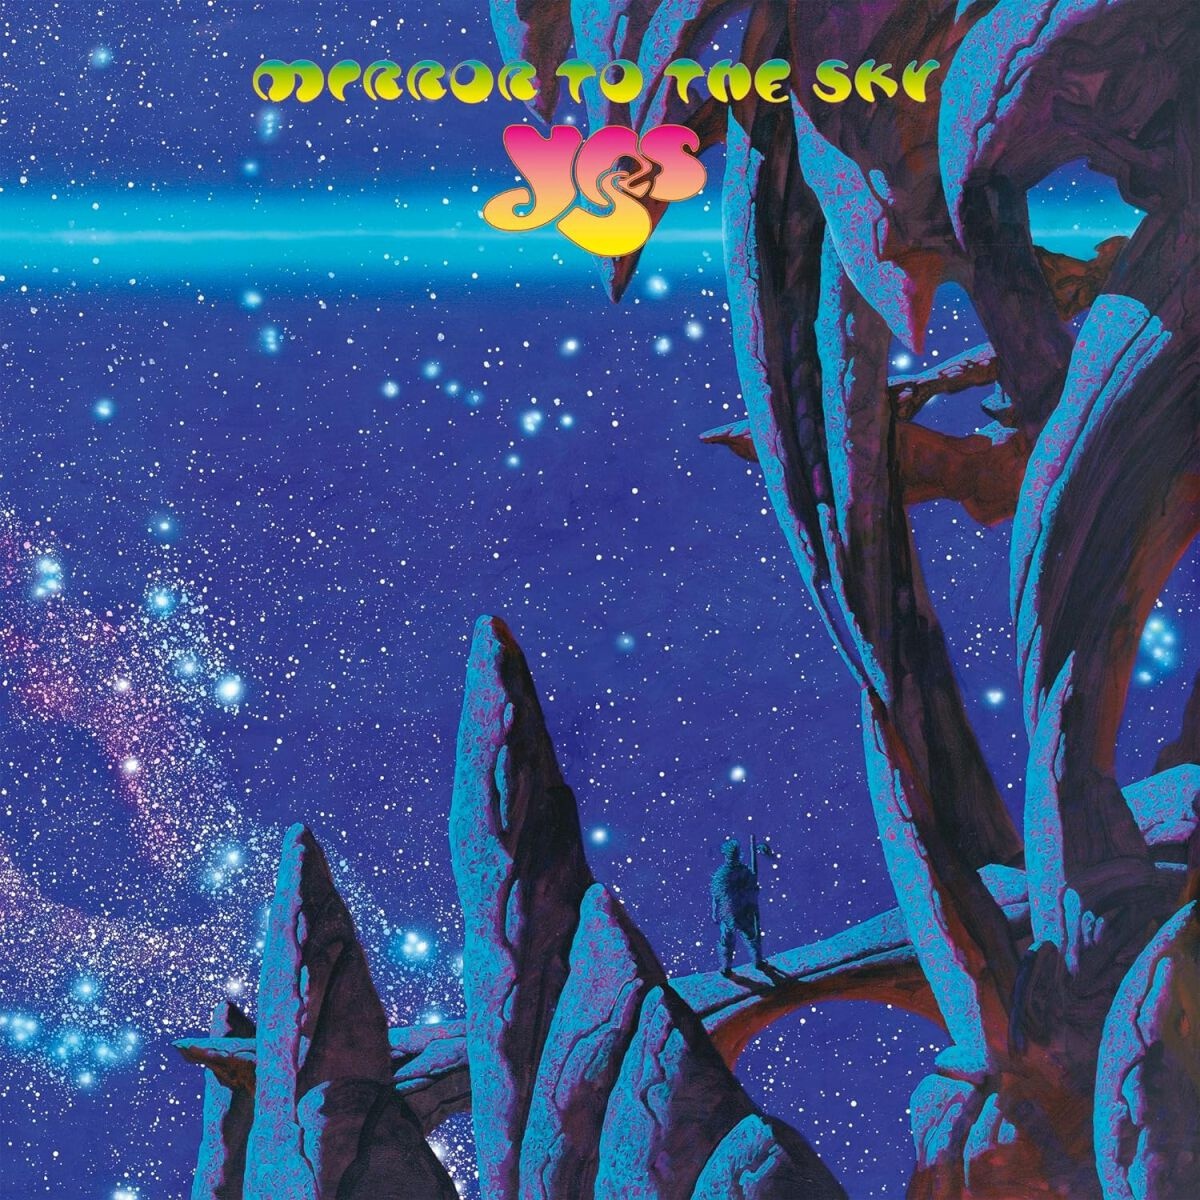 Mirror to the sky von Yes - 2-CD & Blu-ray (Digipak, Limited Edition, Re-Release) - Standard